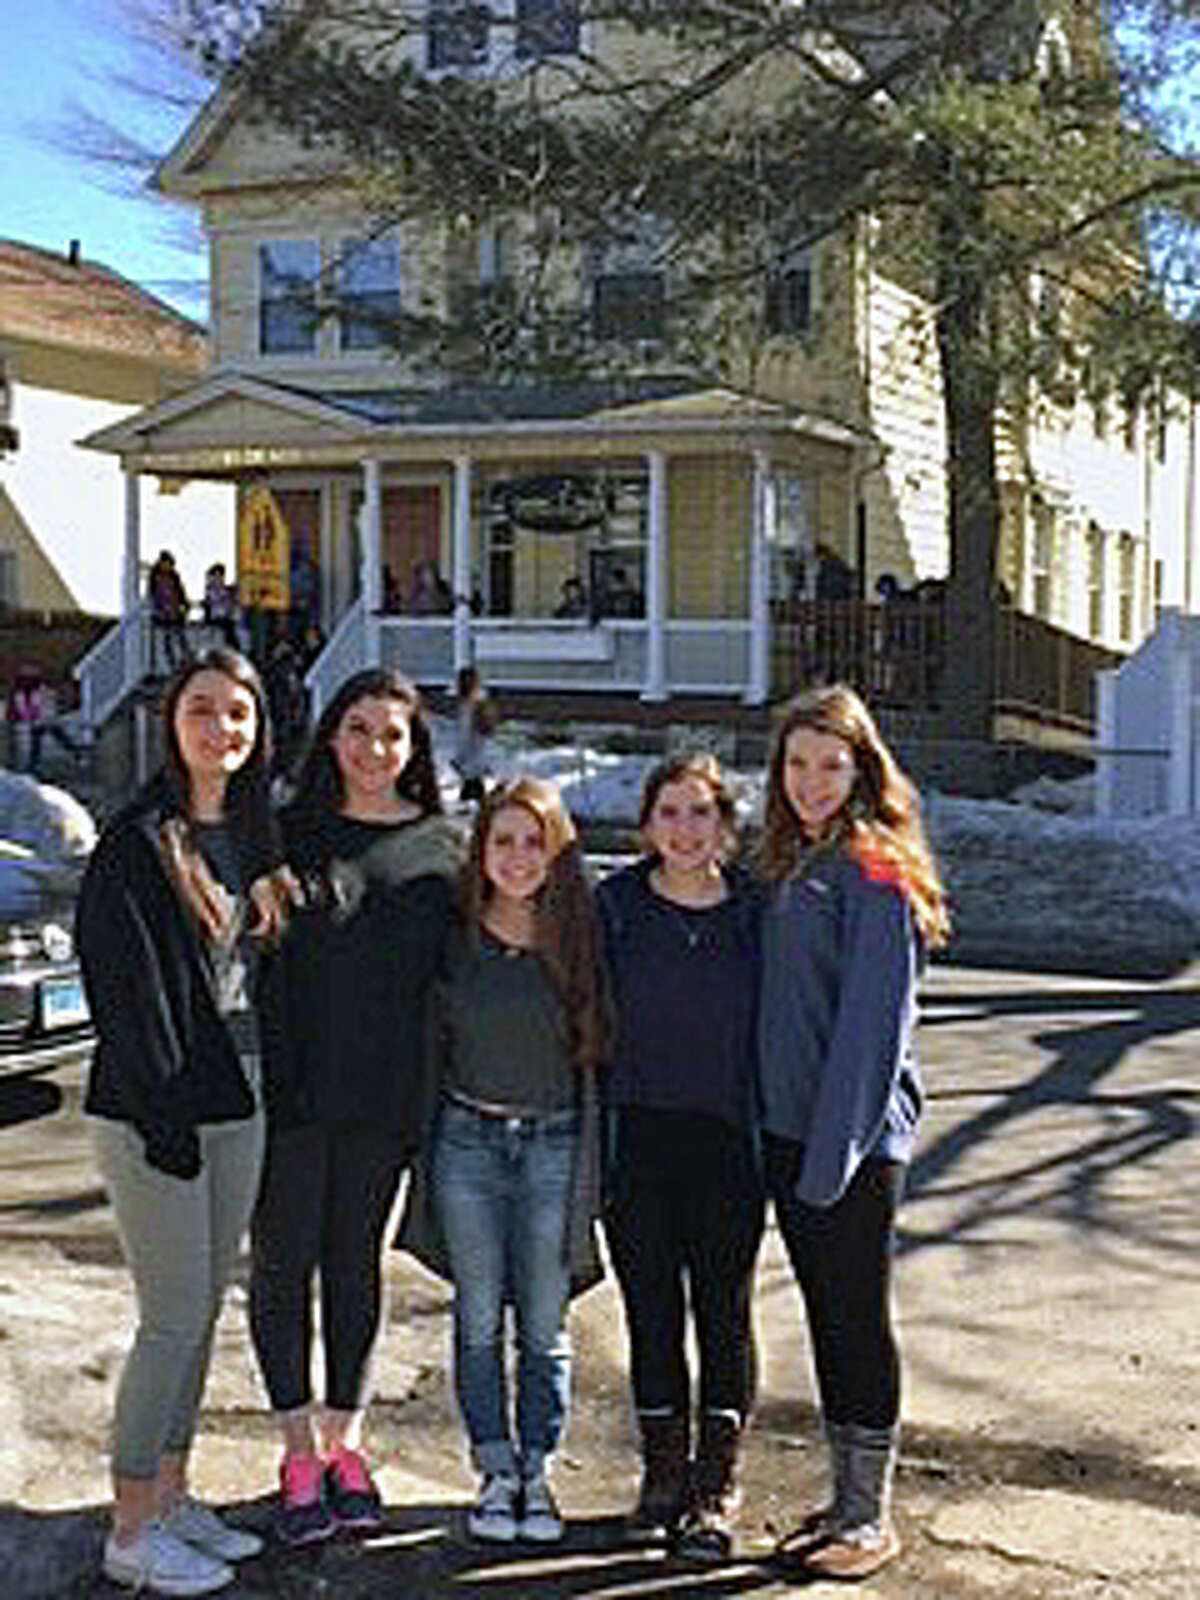 Members of the Caroline House Club, from Fairfield Ludlowe High School, stand outside the non-profit’s home in Bridgeport prior to a recent tutoring session.